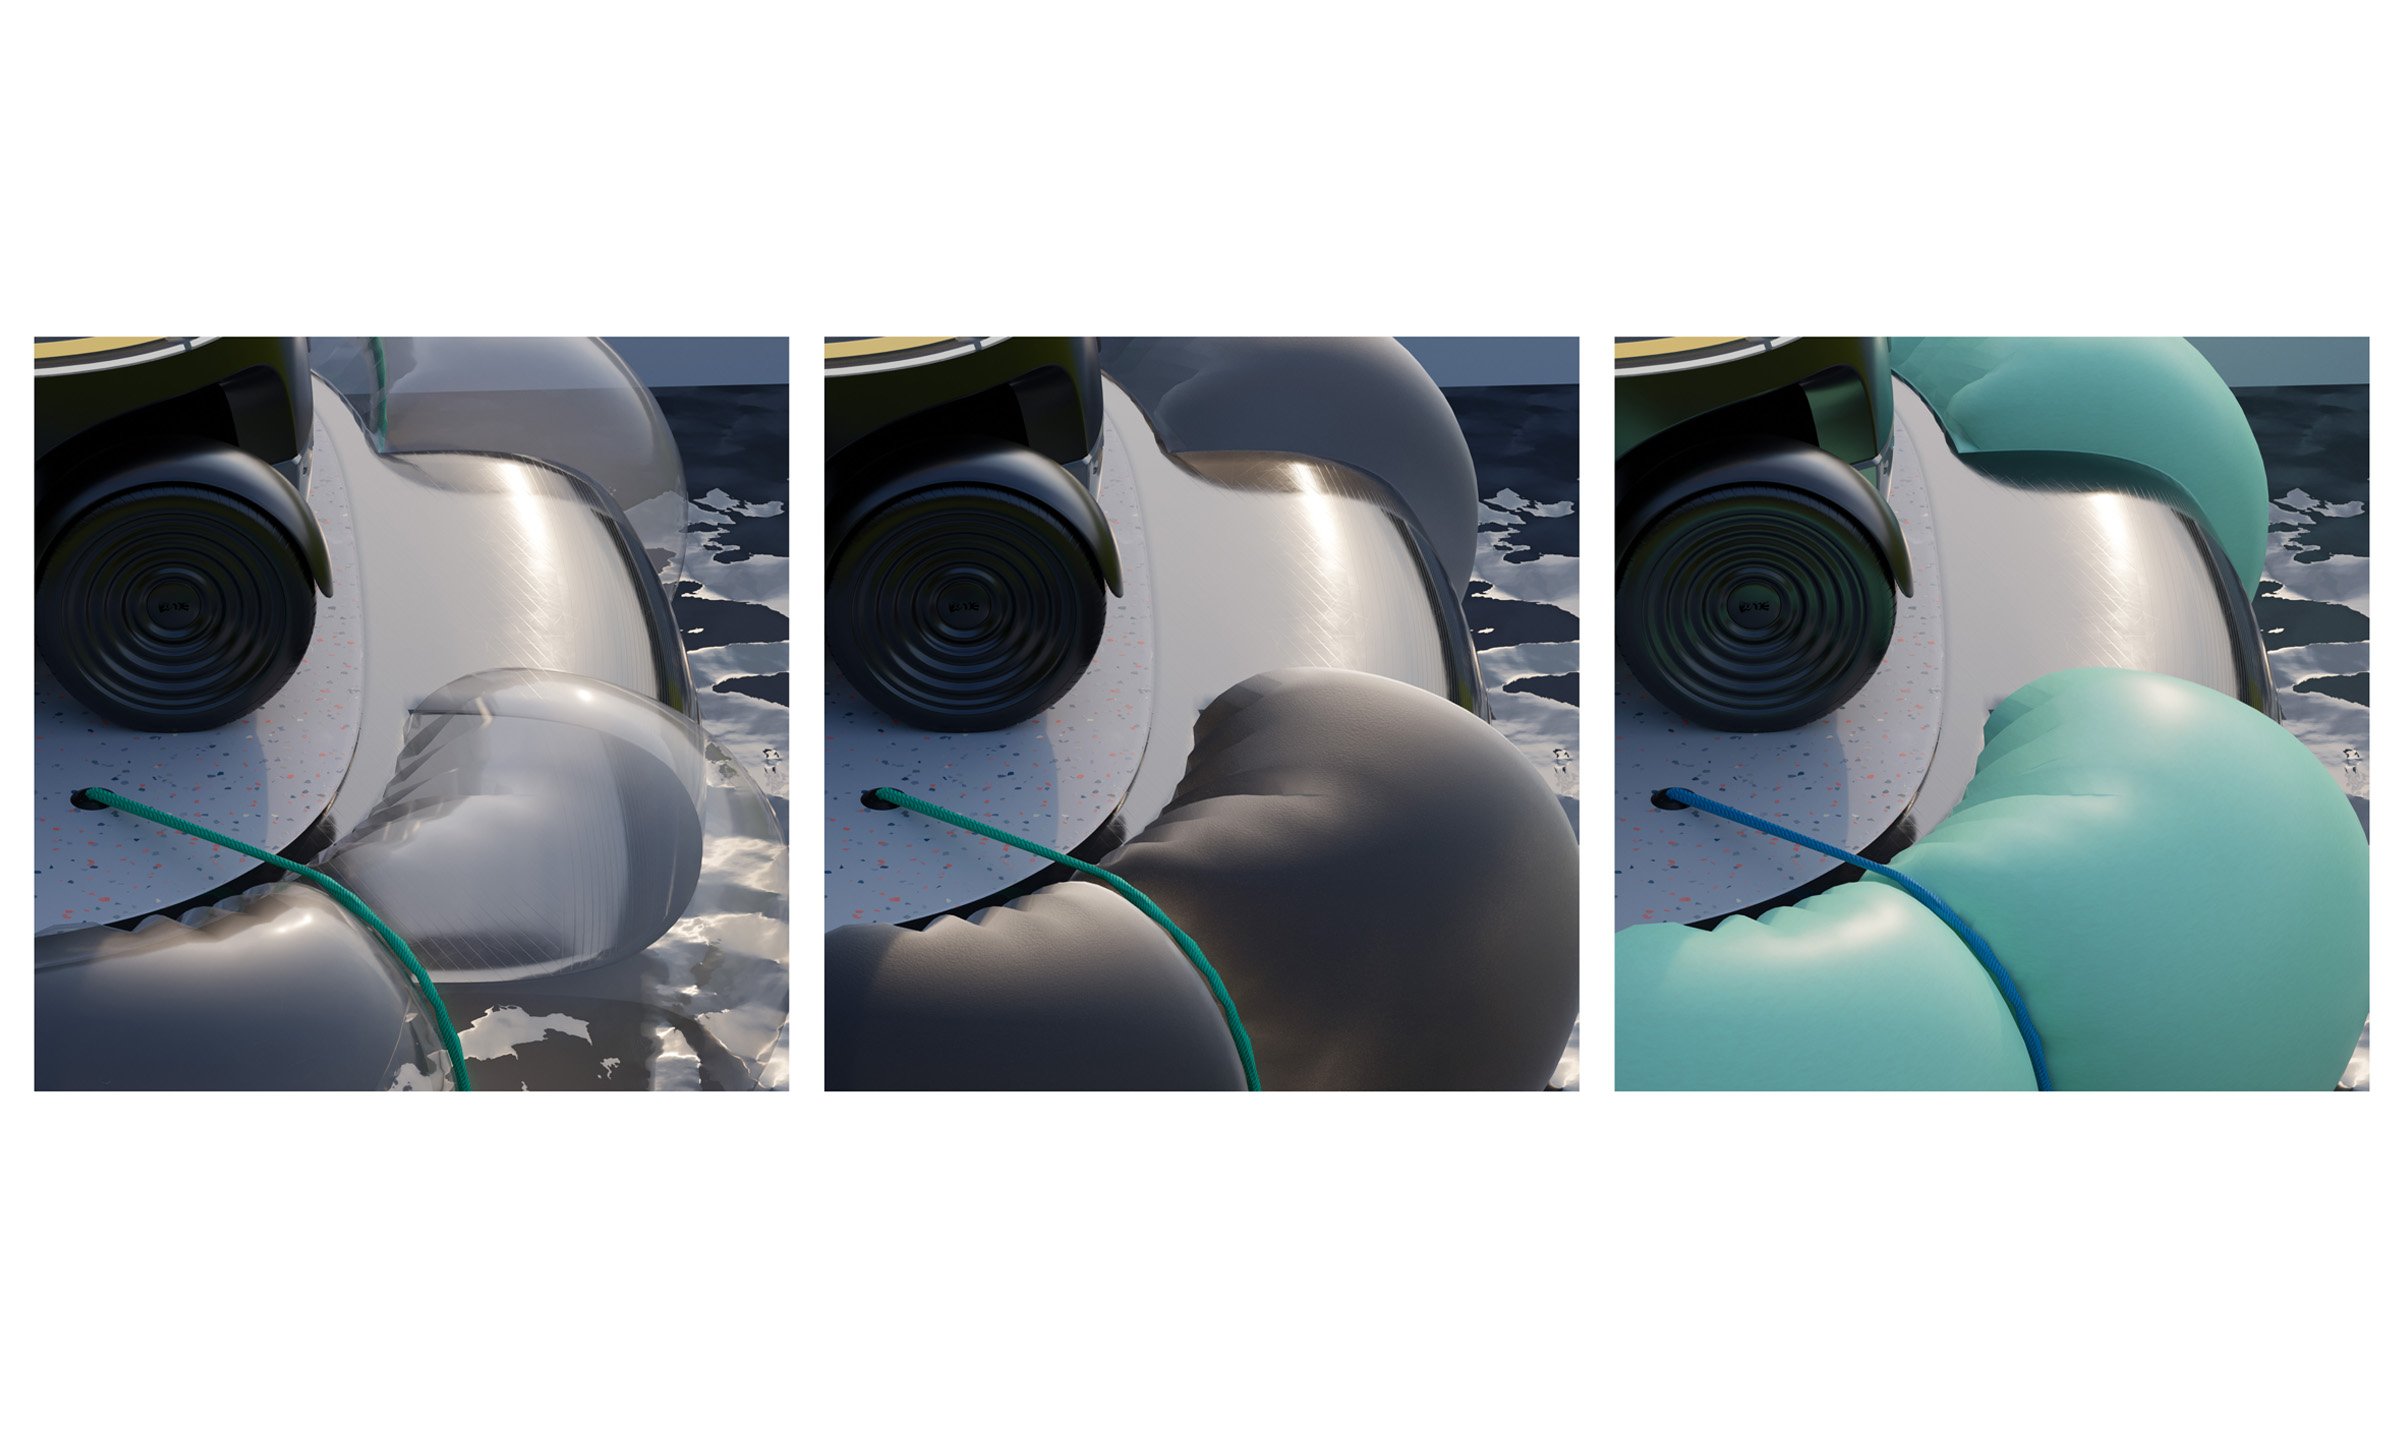 Inflatable platforms (boats) | Options of colours that highlight routes